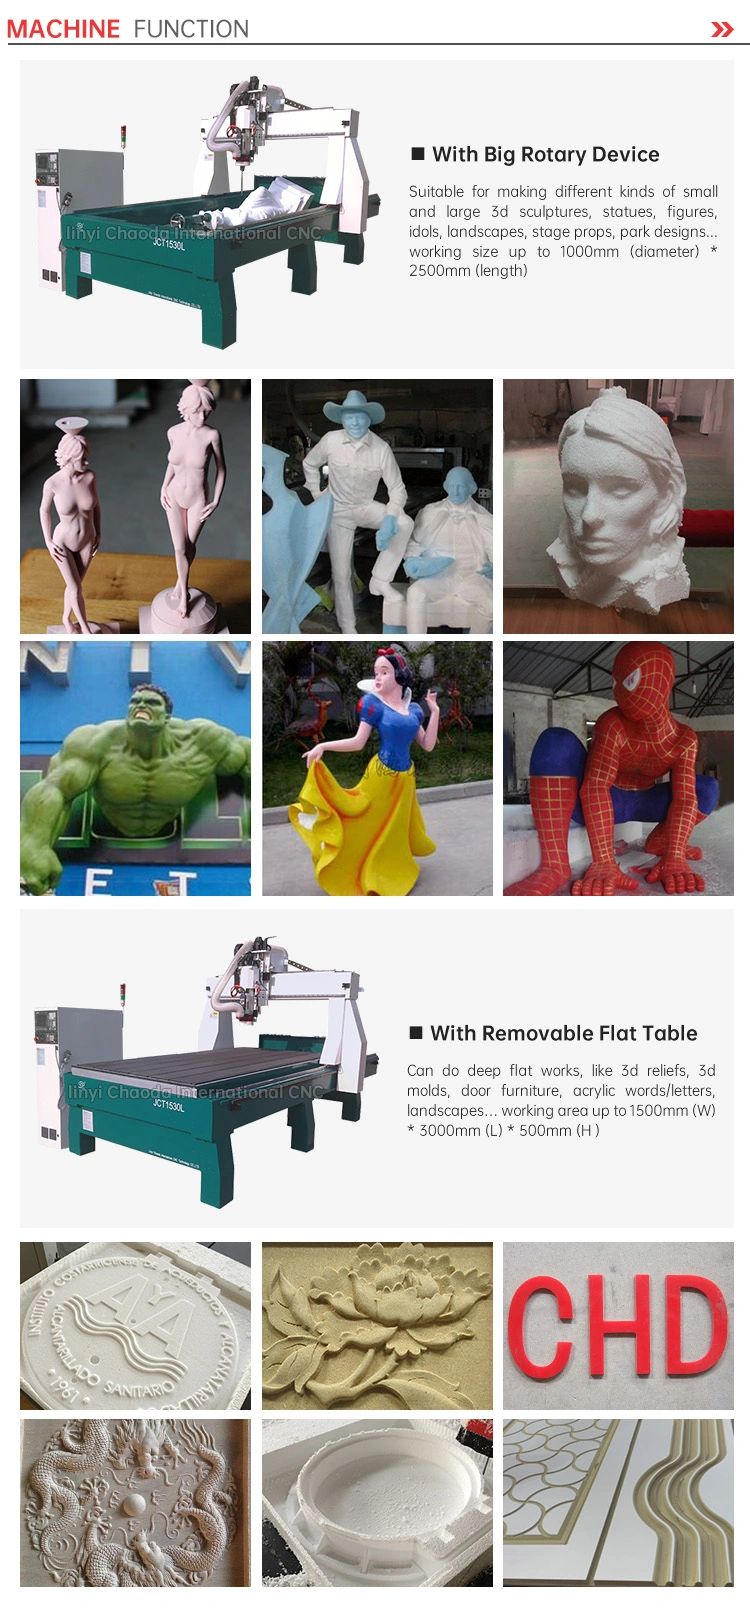 3D Wood Foam Sculpture Statue Figure Column CNC Carving Machine, 4 Axis 1530 CNC Router with 2.5m Rotary